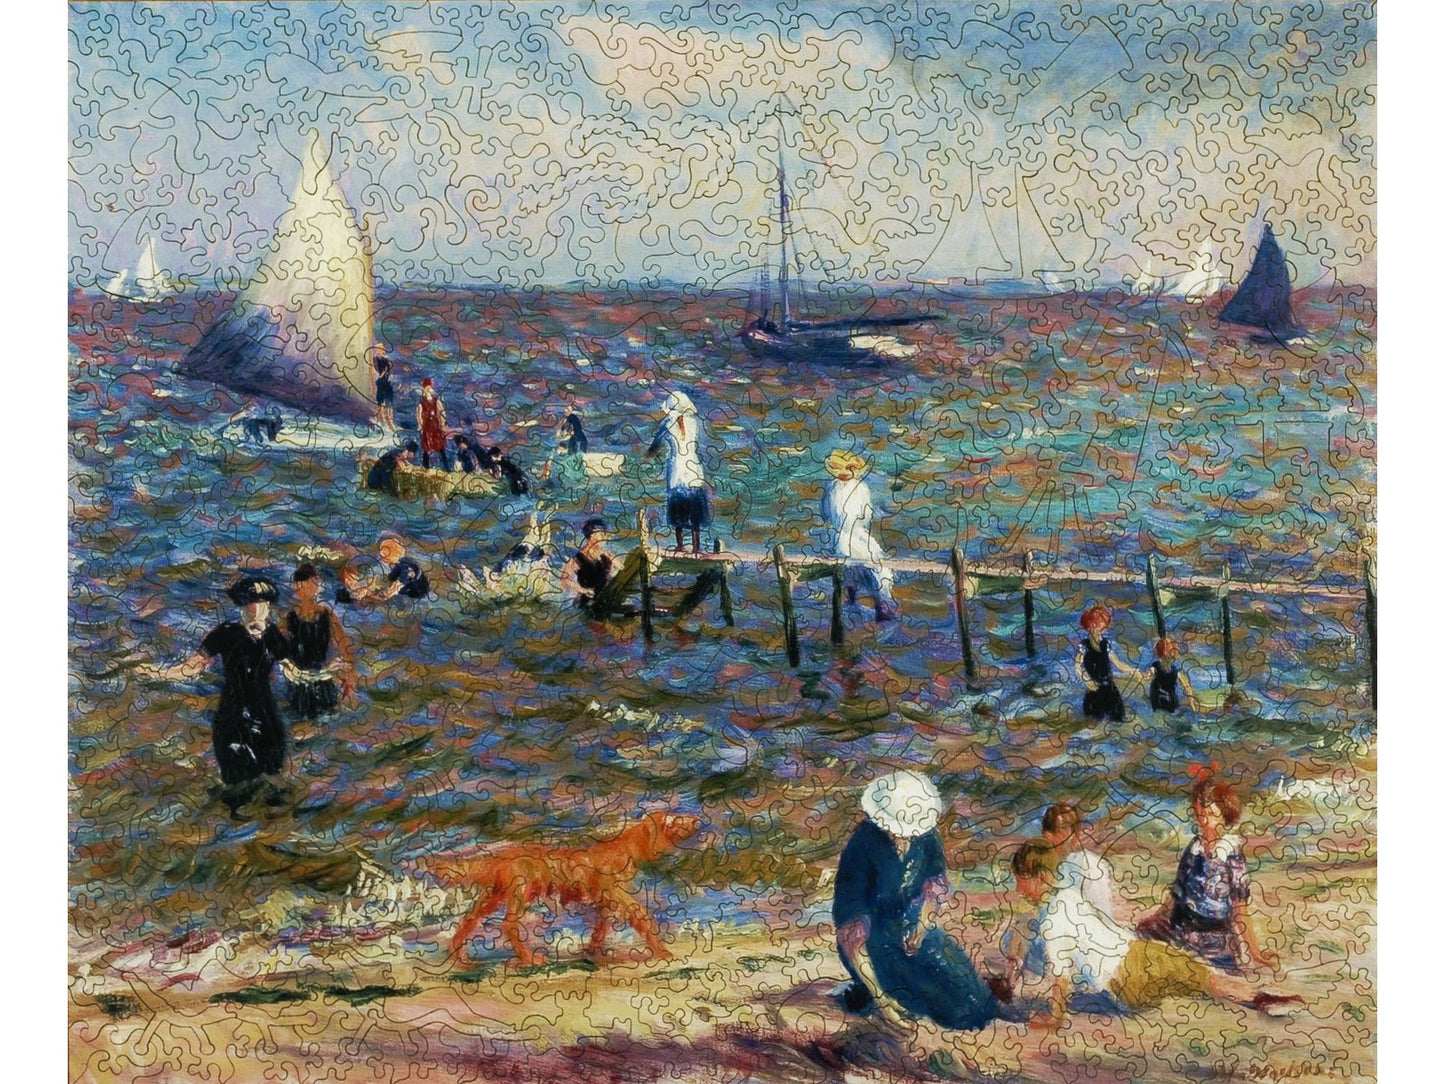 The front of the puzzle, The Little Pier, showing several people playing on the beach and swimming, and sailboats on the ocean.